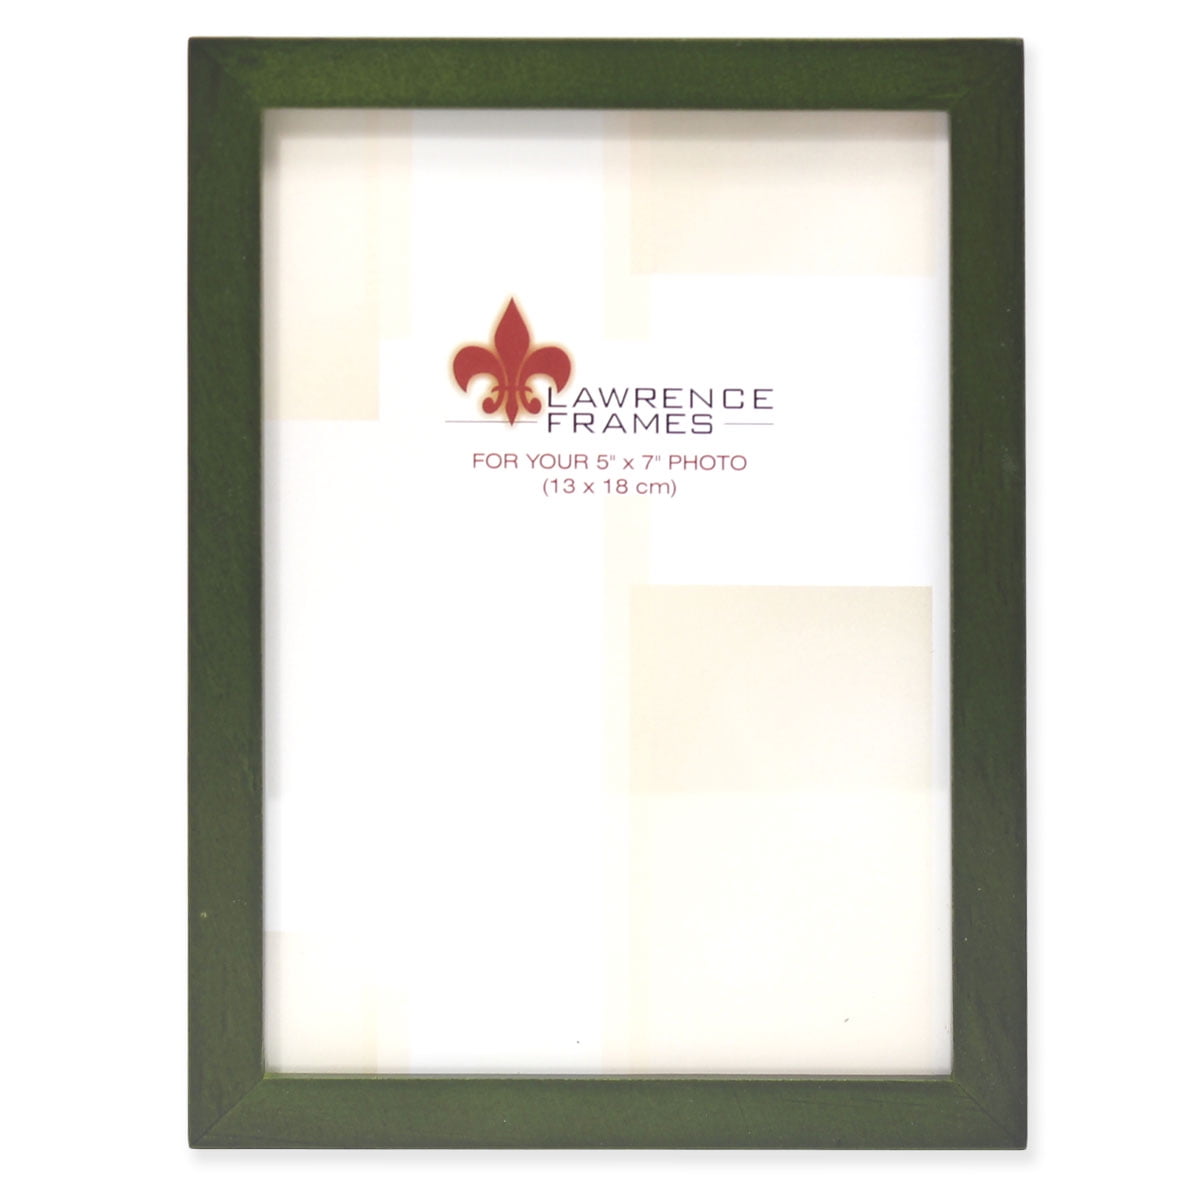 Details about   30x40 Honey Pecan Wood Picture Frame With Acrylic Front and Foam Board Backing 